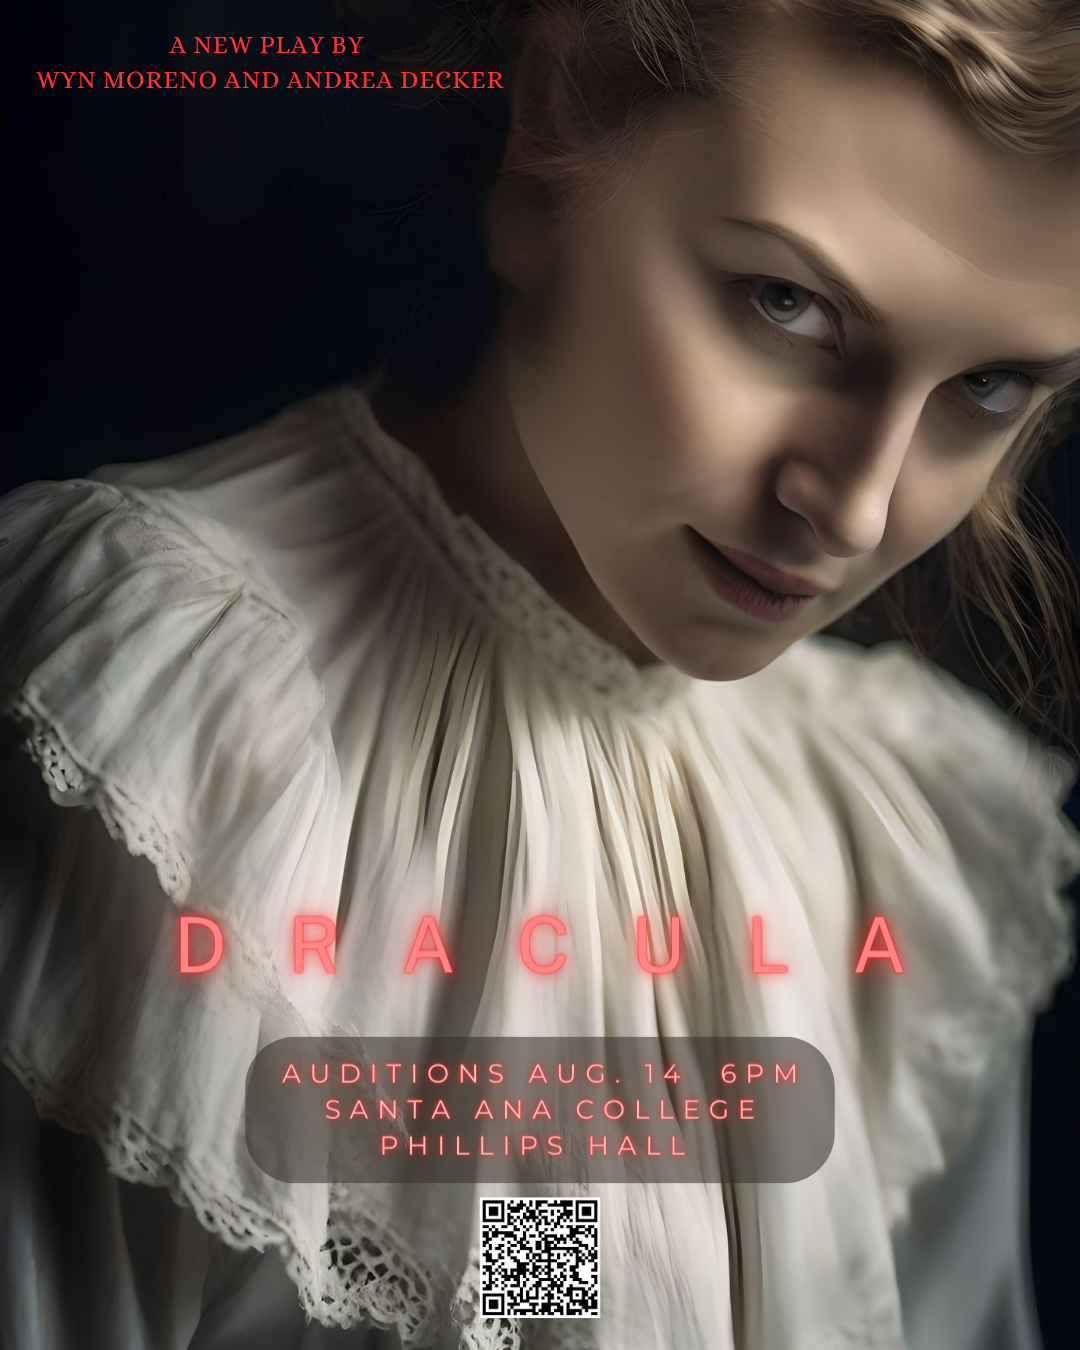 British woman in vintage dress with caption, "Dracula Auditions August 14, 6pm Santa Ana College Phillips Hall" 